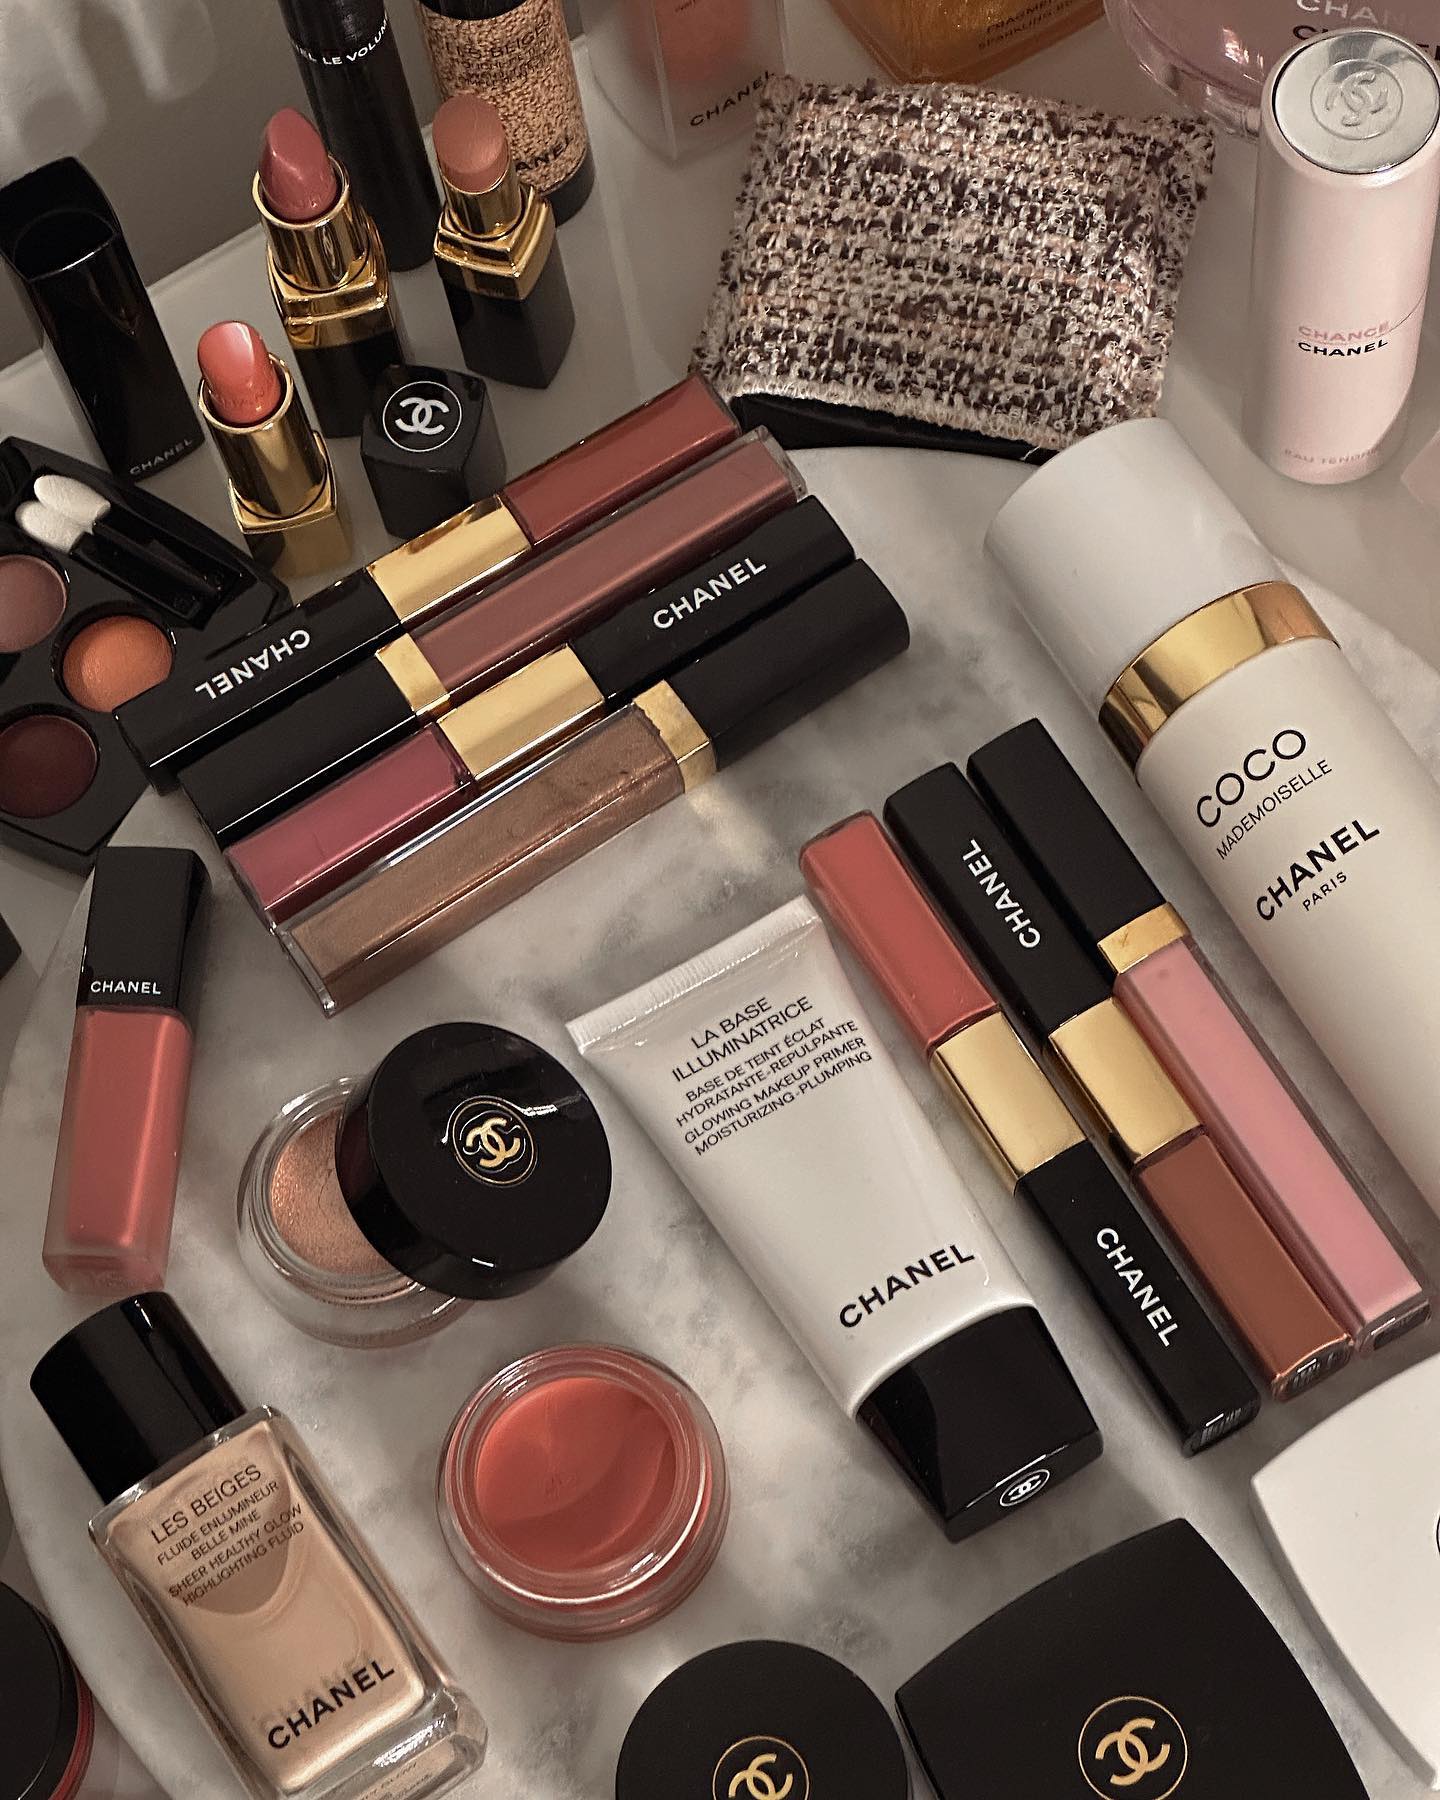 Chanel Beauty Spring-Summer 2018 Collection Picks - The Beauty Look Book